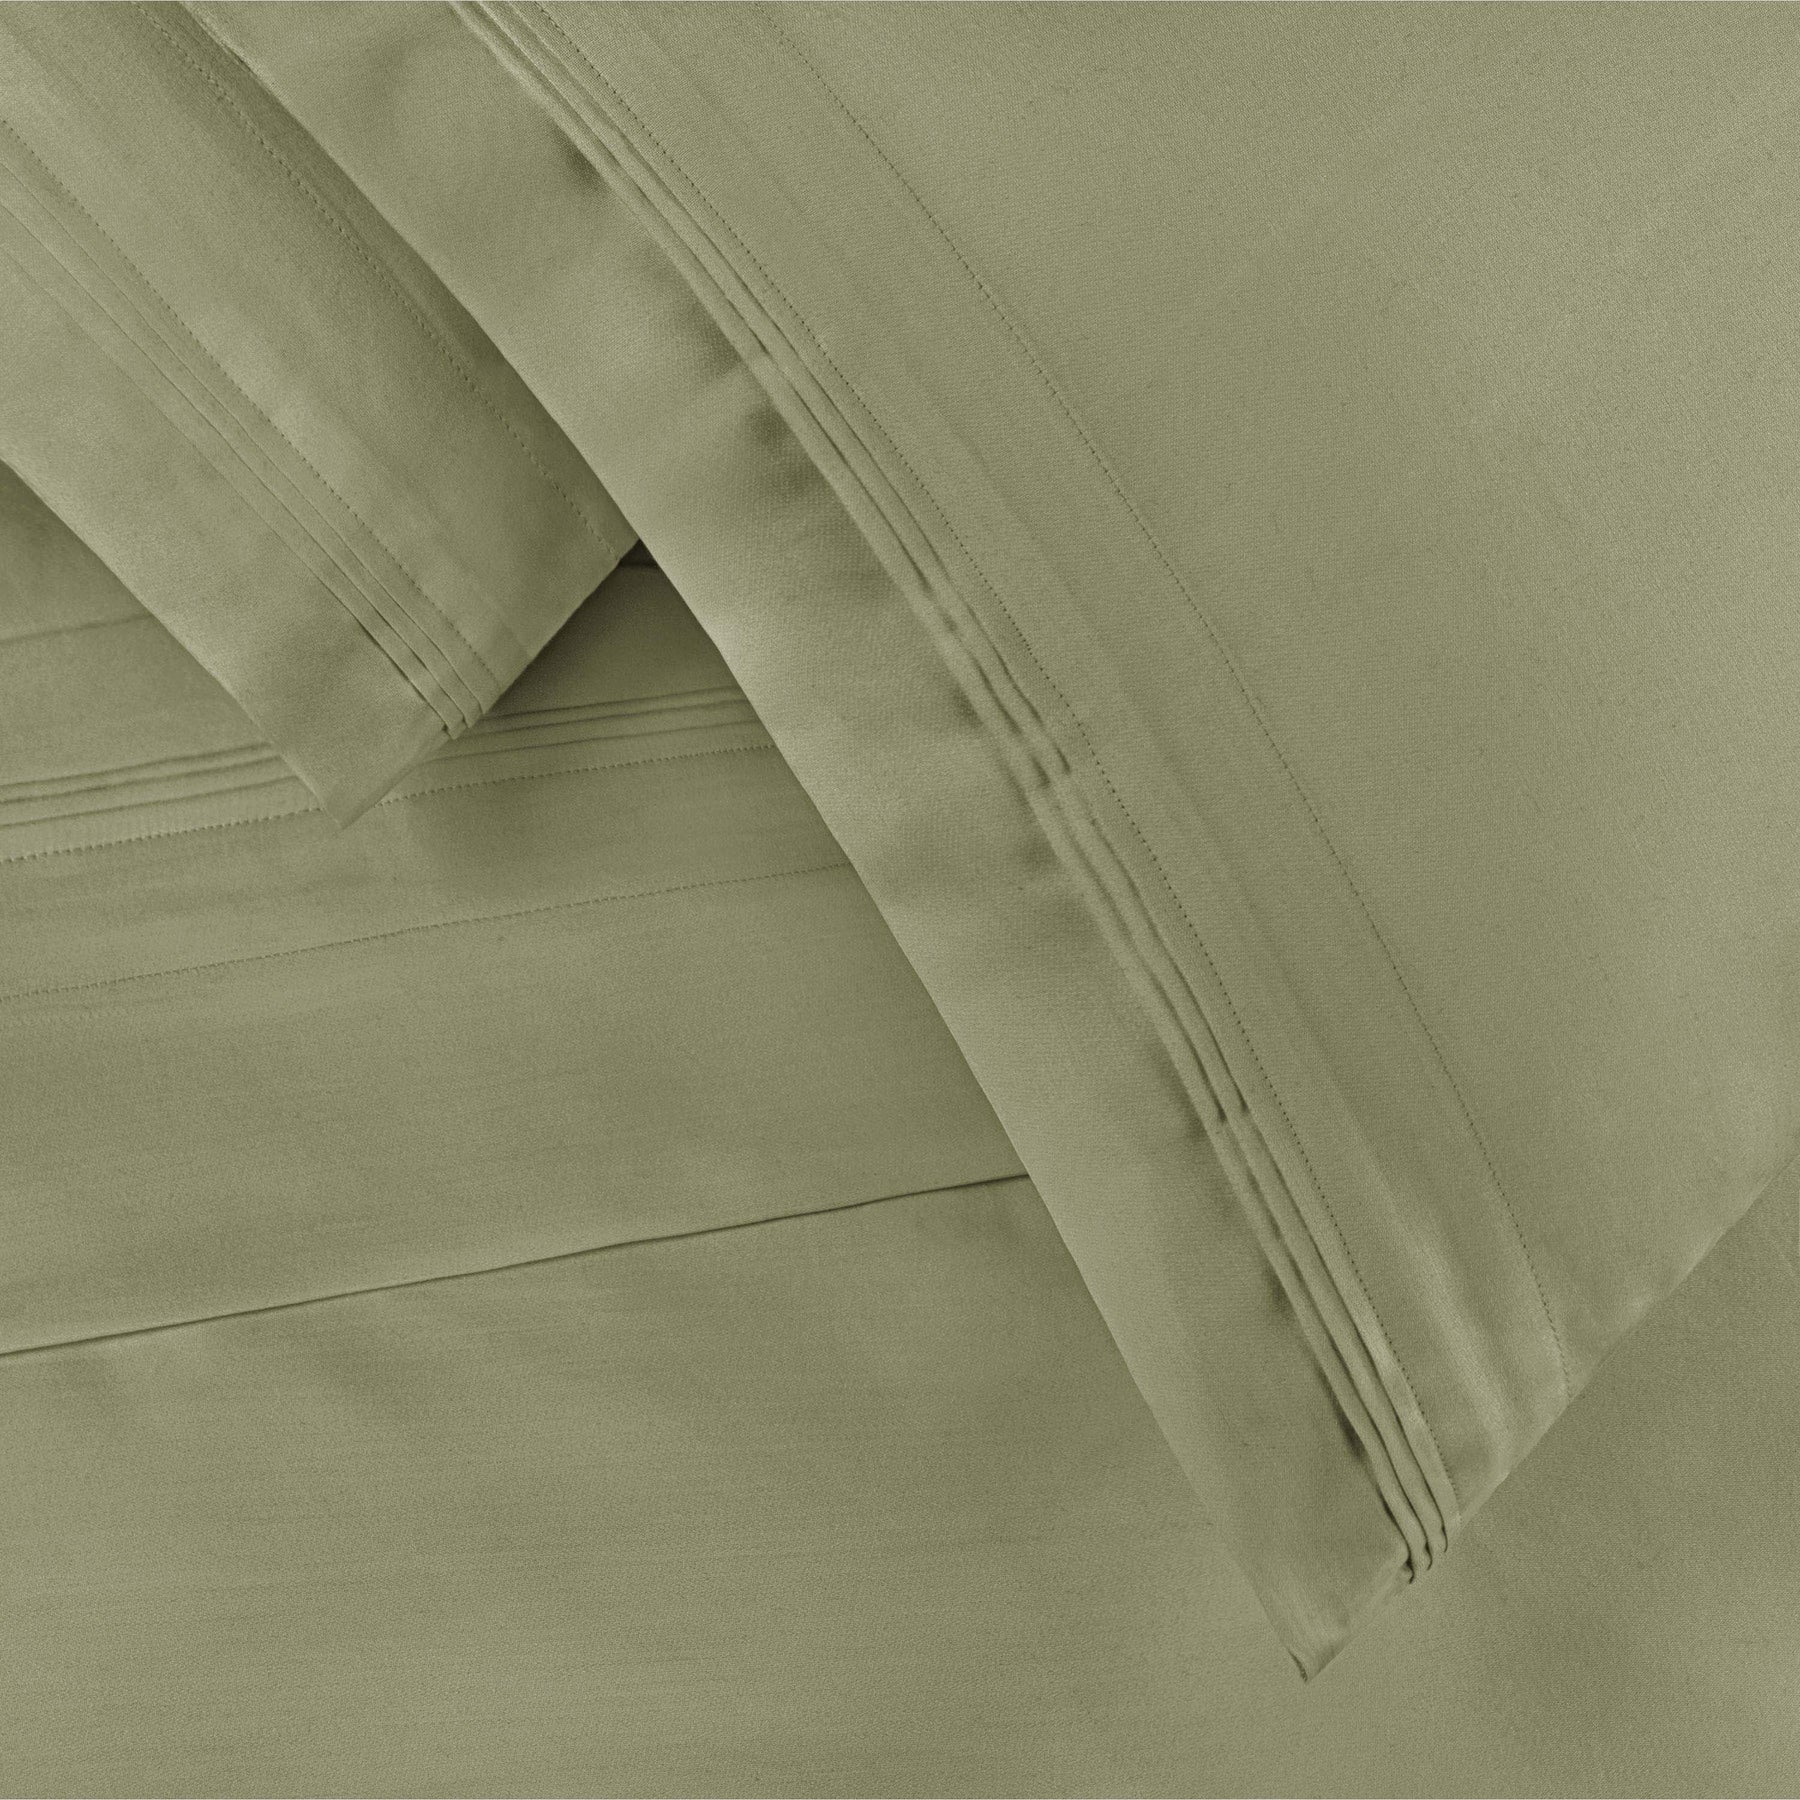 Egyptian Cotton 650 Thread Count Eco-Friendly Solid Sheet Set - Sage